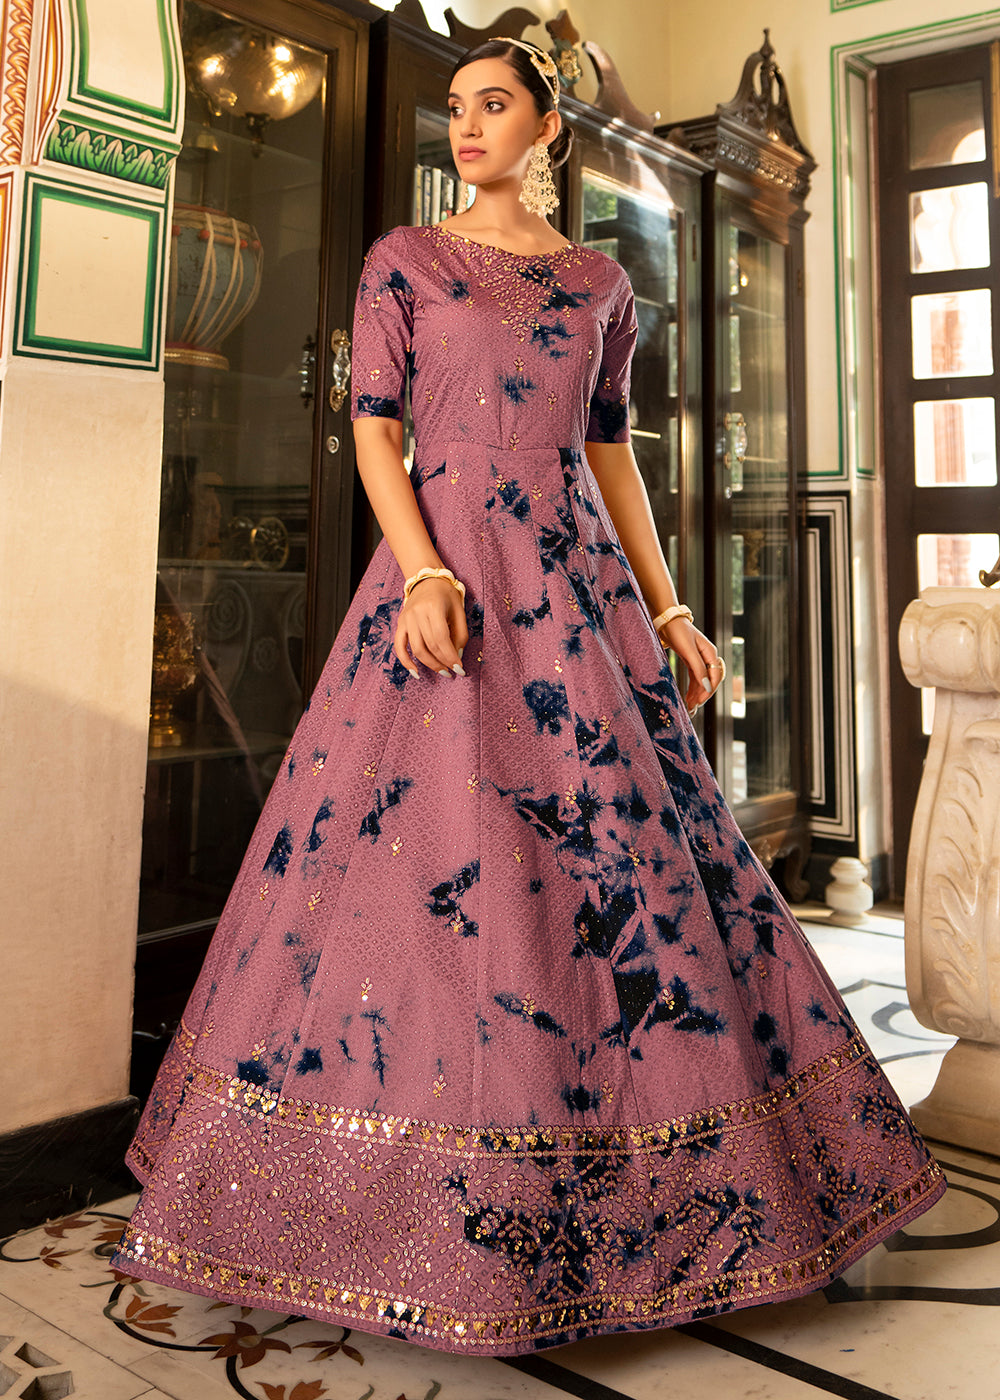 Buy Now Mauve Shibori Print Embroidered Floor Length Cotton Gown Online in USA, UK, Australia, New Zealand, Canada & Worldwide at Empress Clothing.